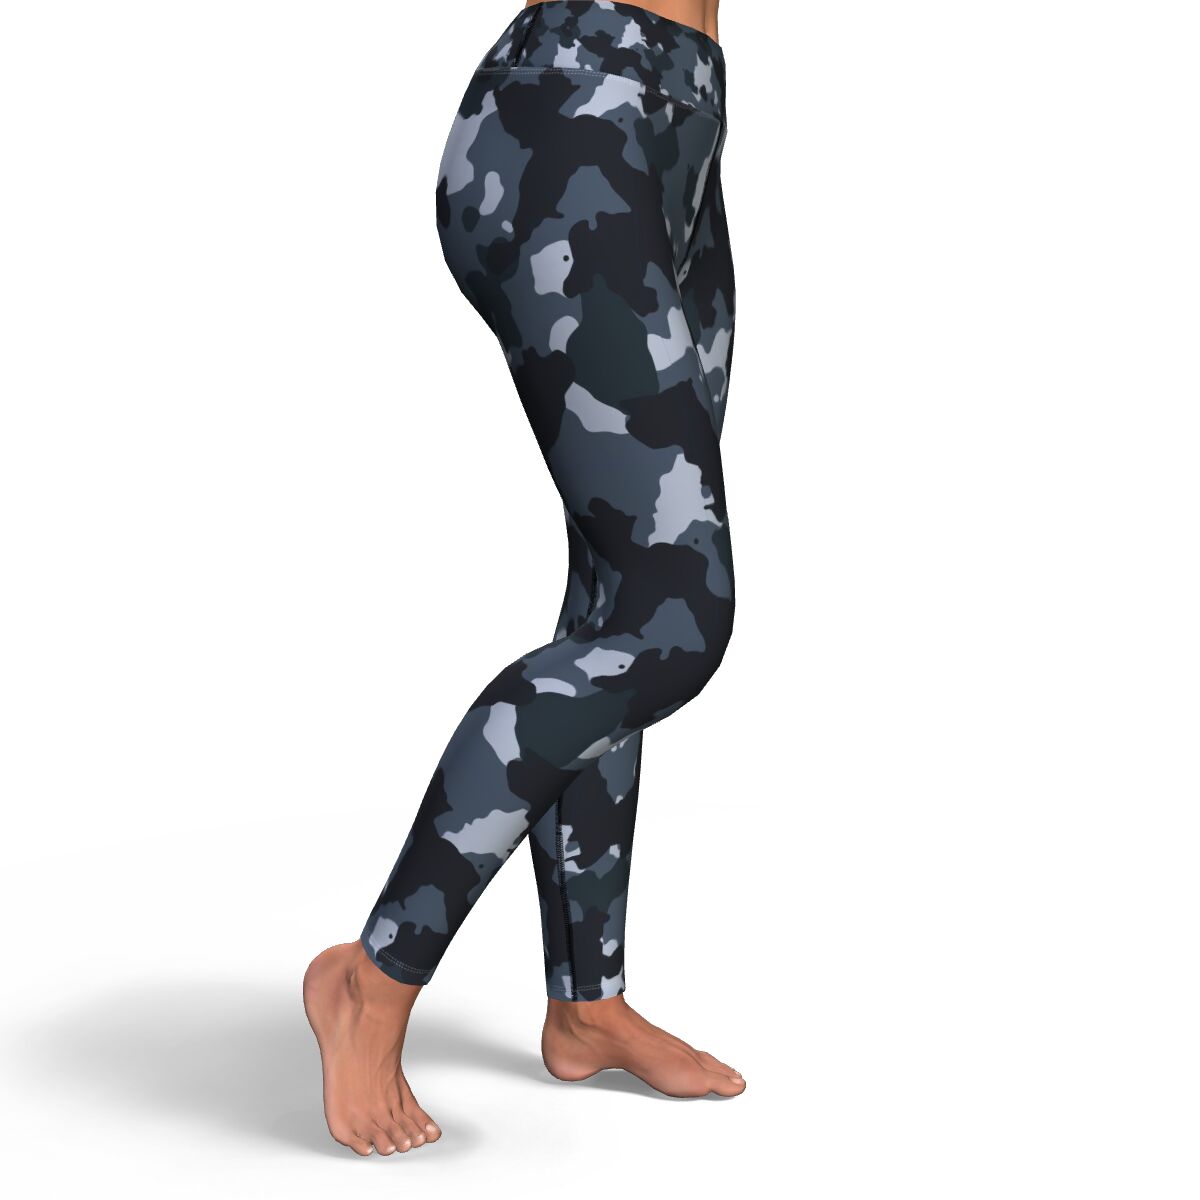 Women's Winter Soldier Camouflage High-waisted Leggings Right